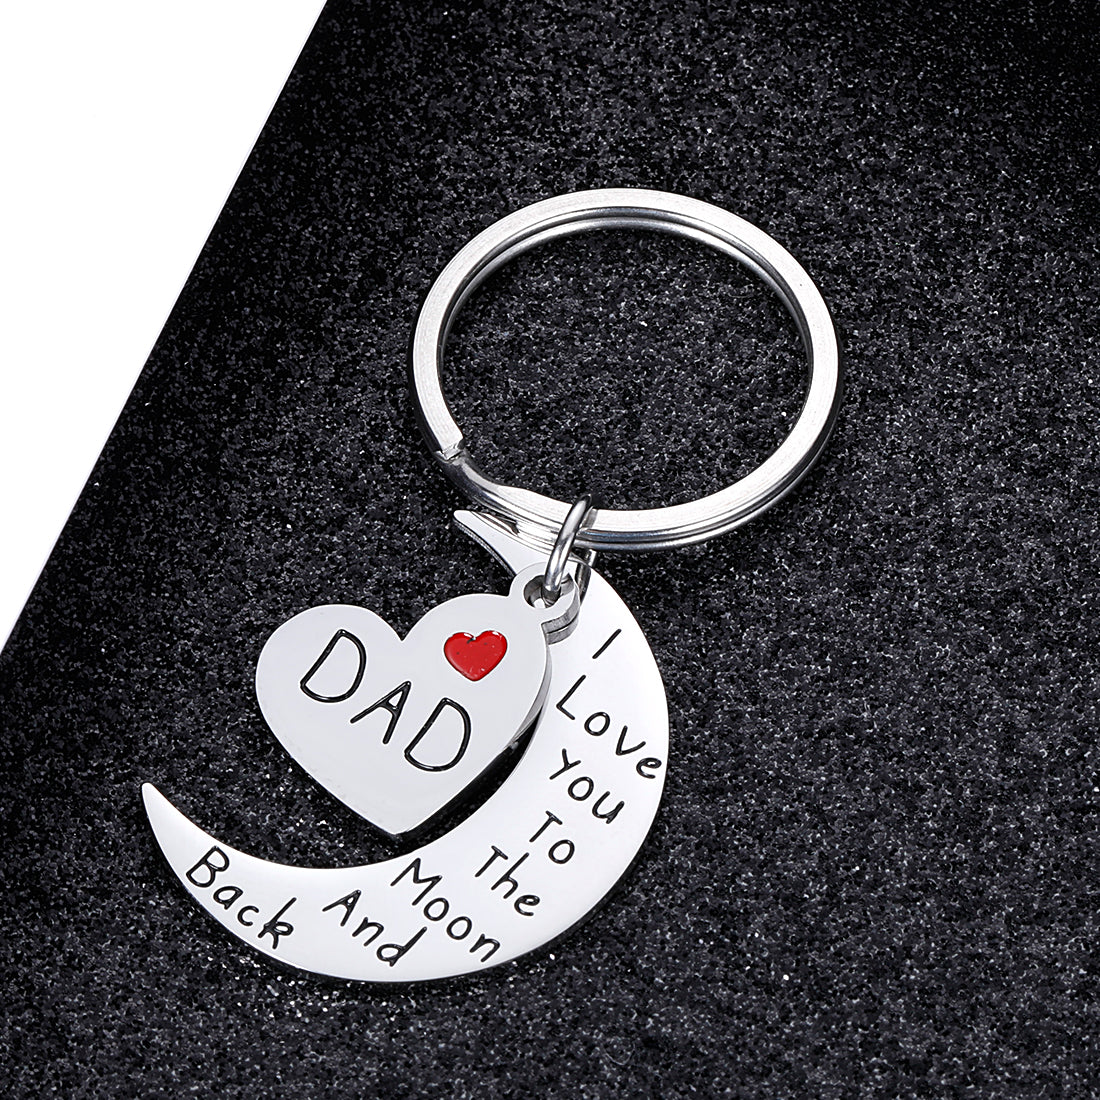 Stainless Steel Love Moon Keychain Private Custom Tag Creative Small Gifts